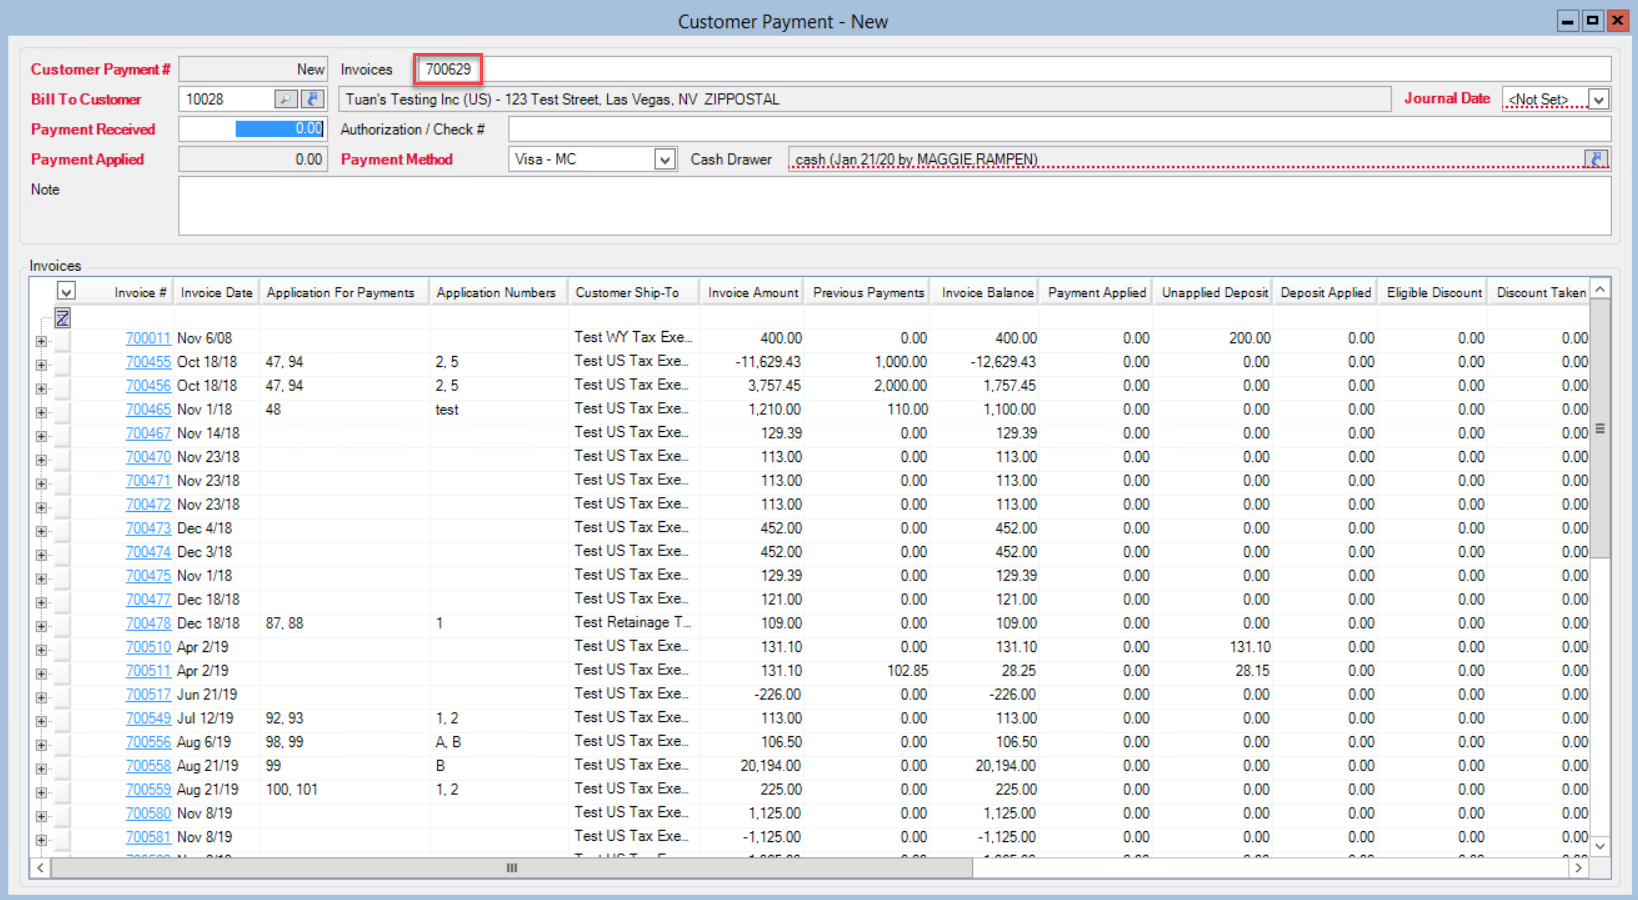 Customer Payment window; shows location of the Invoices field.